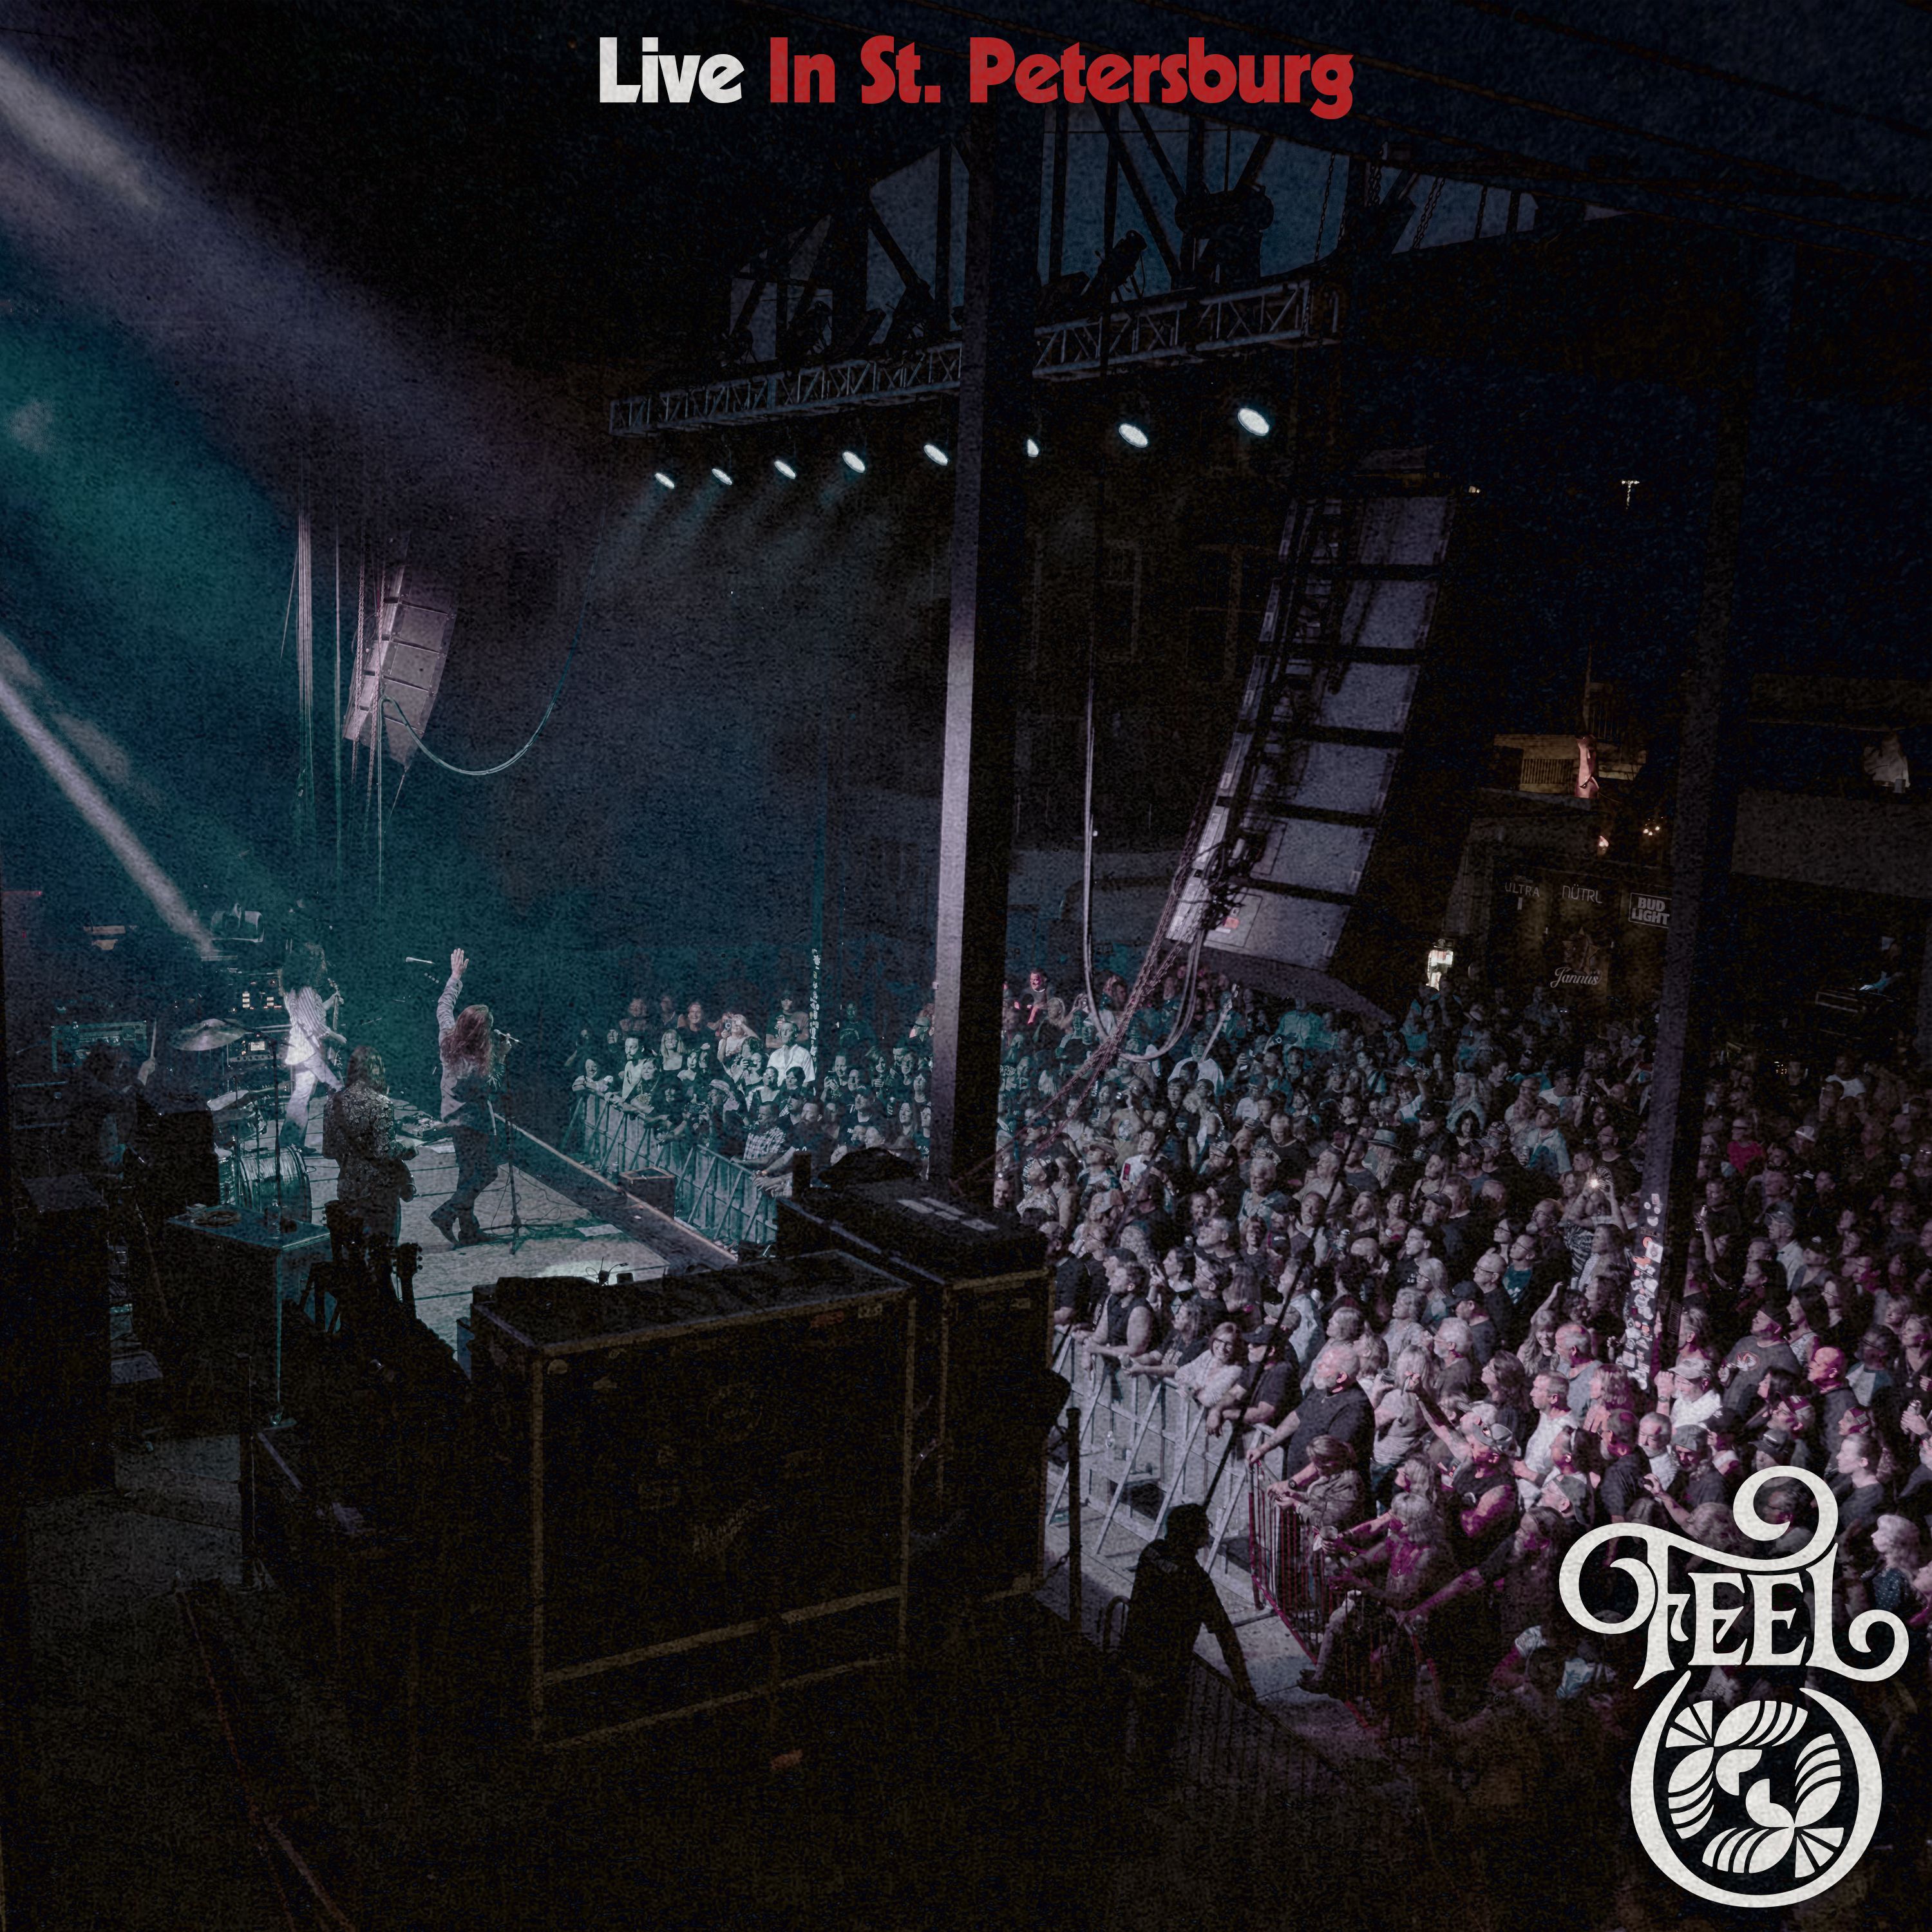 FEEL Brings the Concert Home with 'Live In St. Petersburg' EP